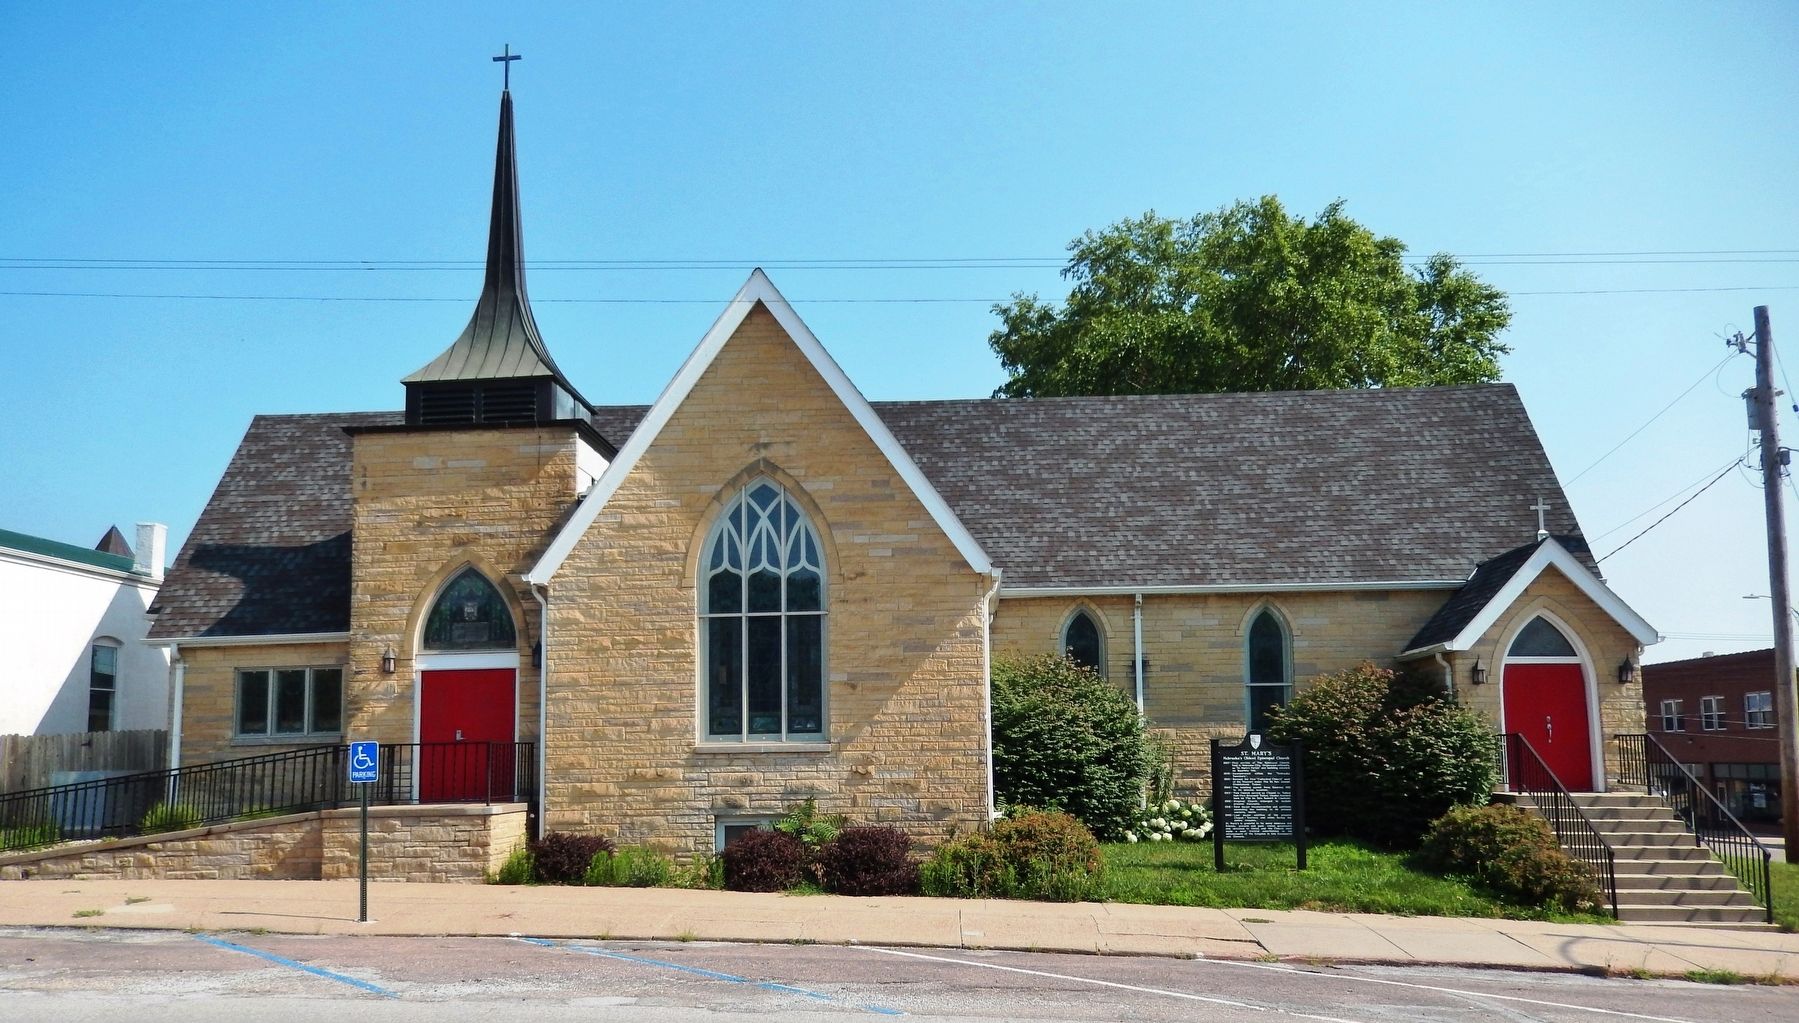 St. Mary's Episcopal Church image. Click for full size.